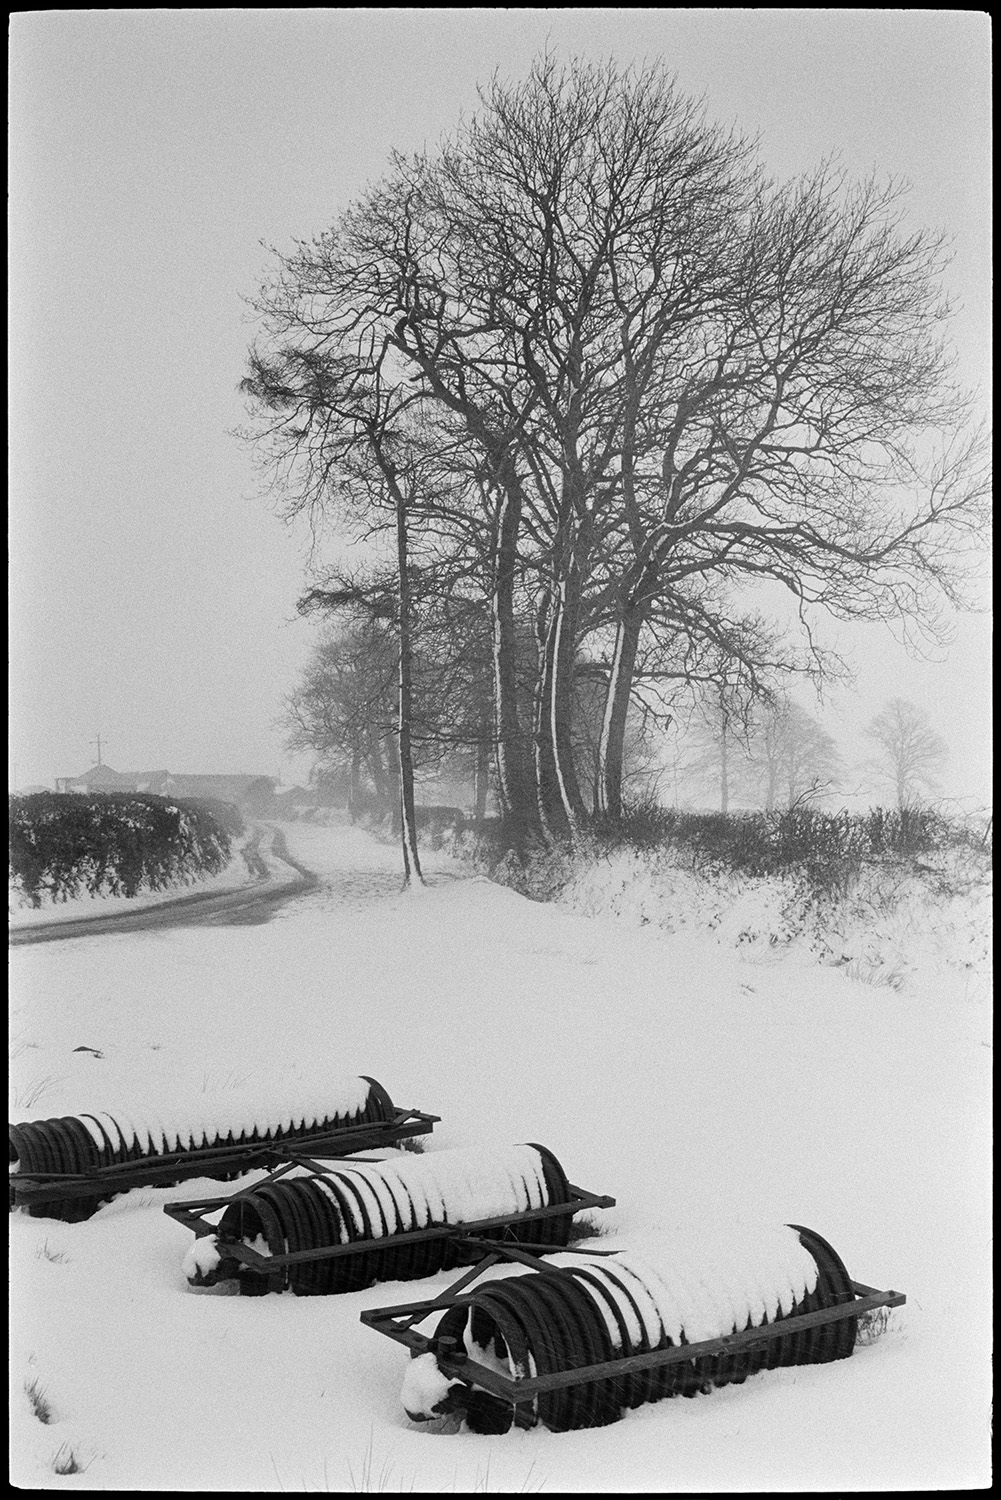 Snow, rollers and trees in blizzard. 
[Three rollers in a snow covered field with trees at Westacott, Riddlecombe. A partially clear road can be seen in the background.]